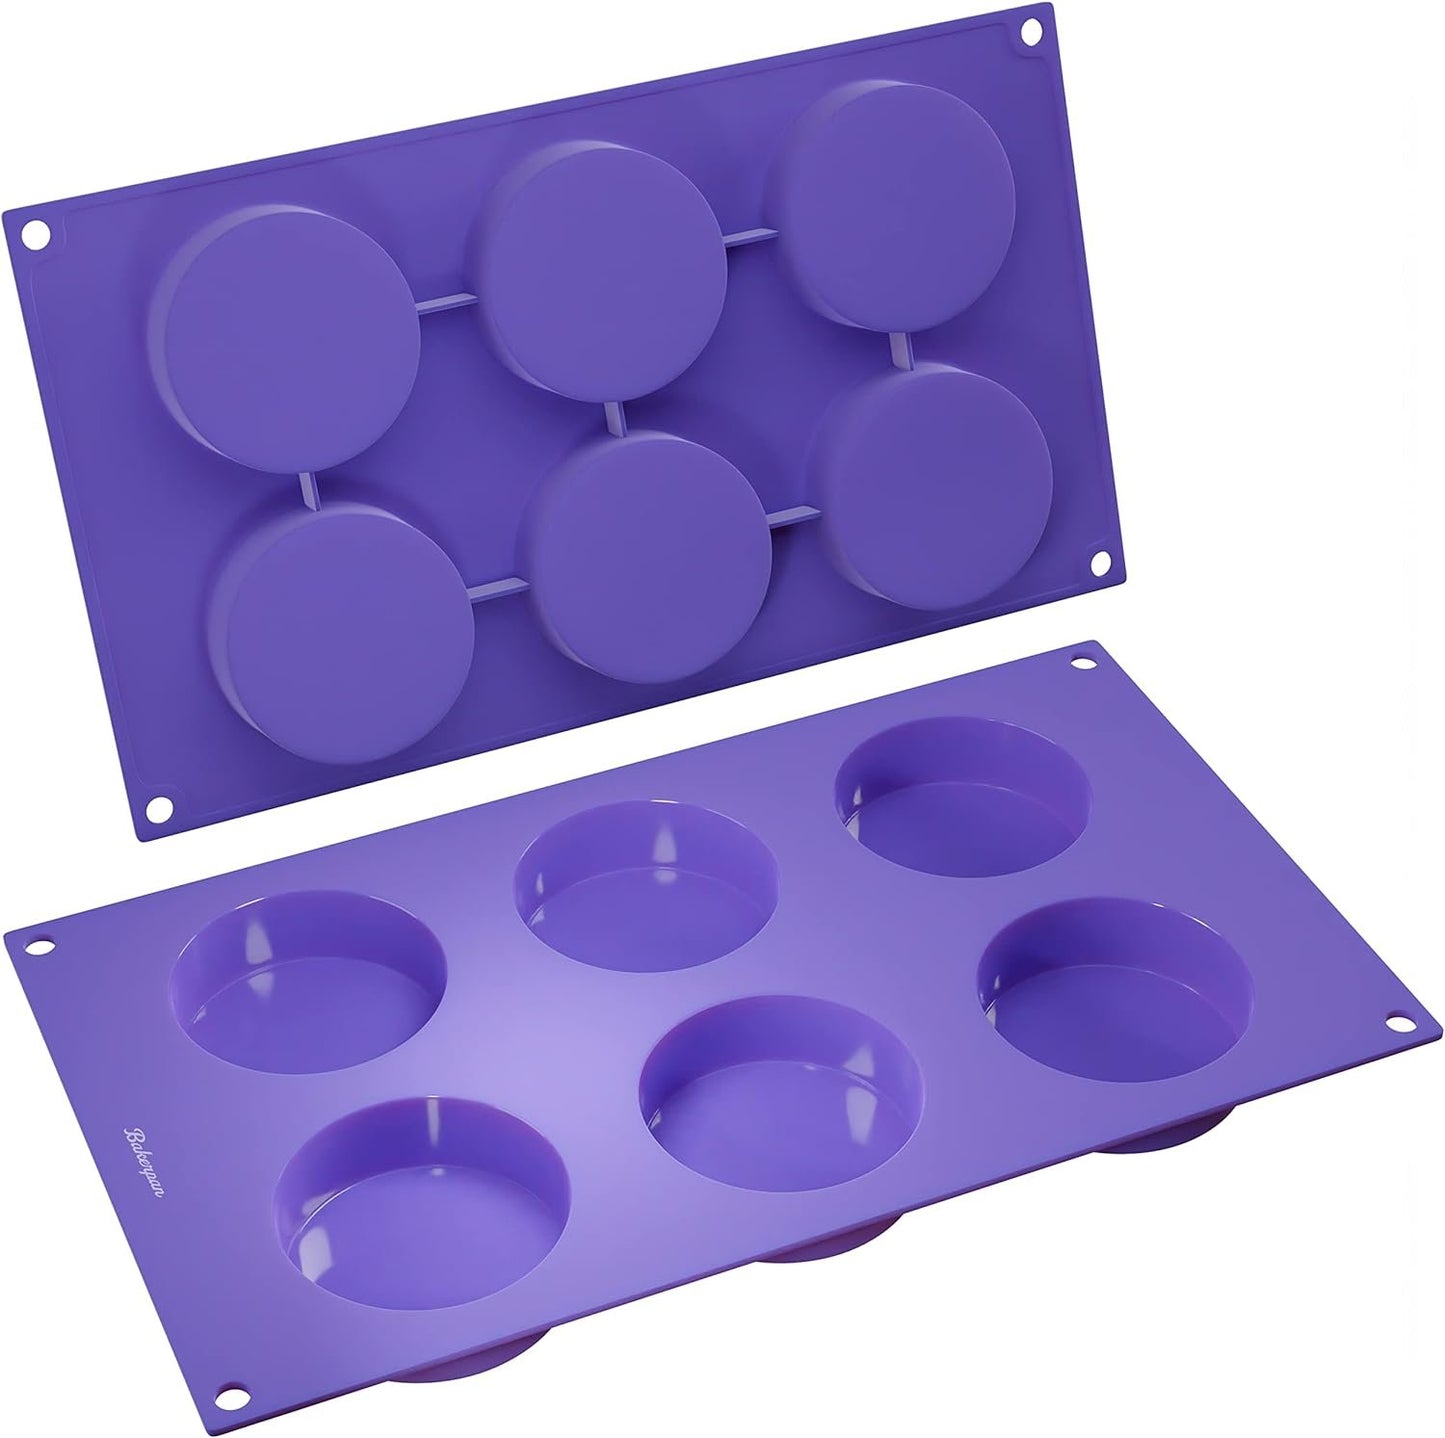 Bakerpan Silicone Muffin Top Pans, Mini Tarts, Whoopie Pie Pan, Egg Molds